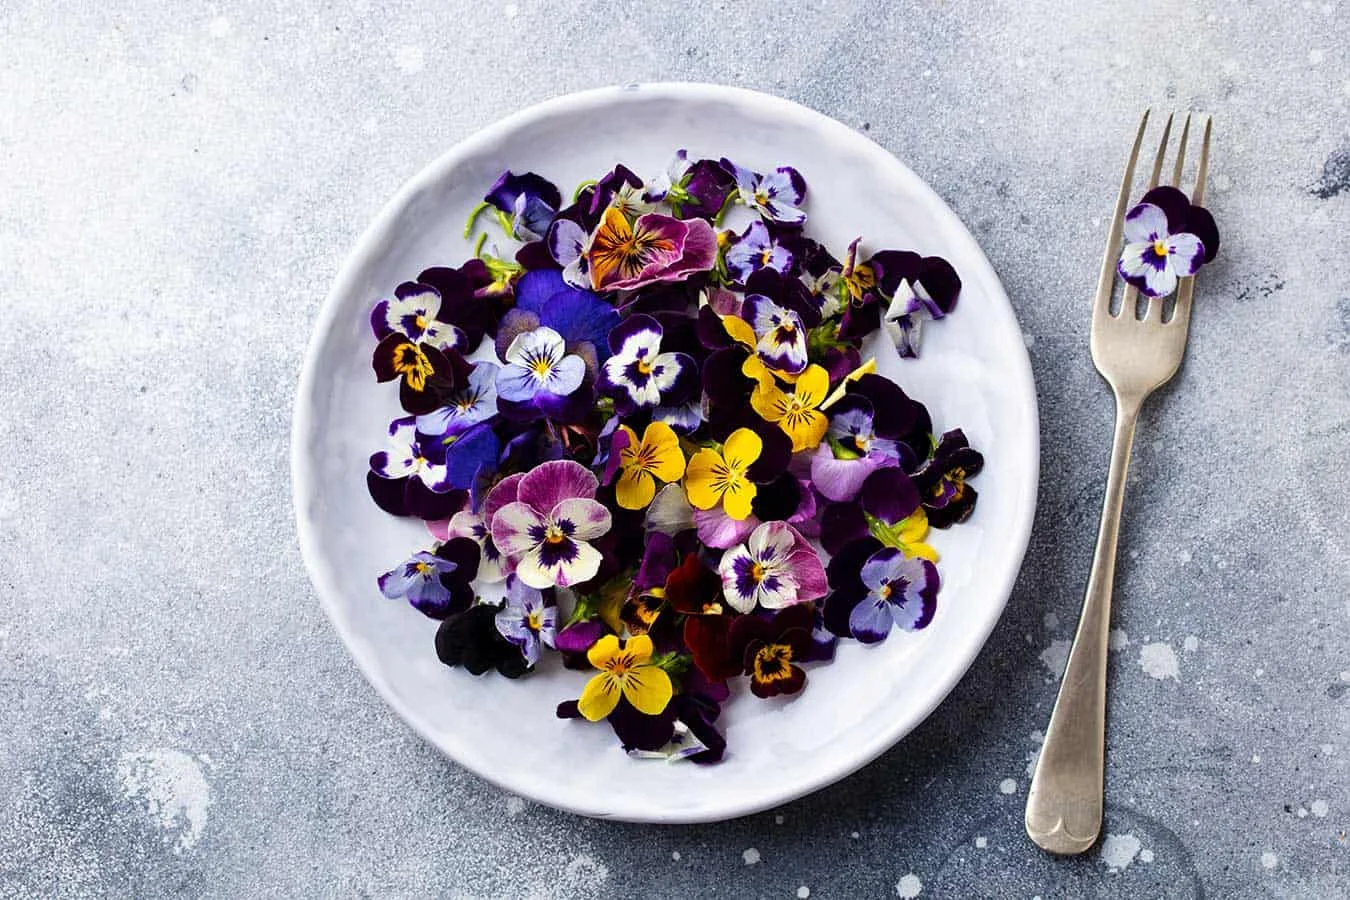 common-edible-flowers-for-decorating-desserts